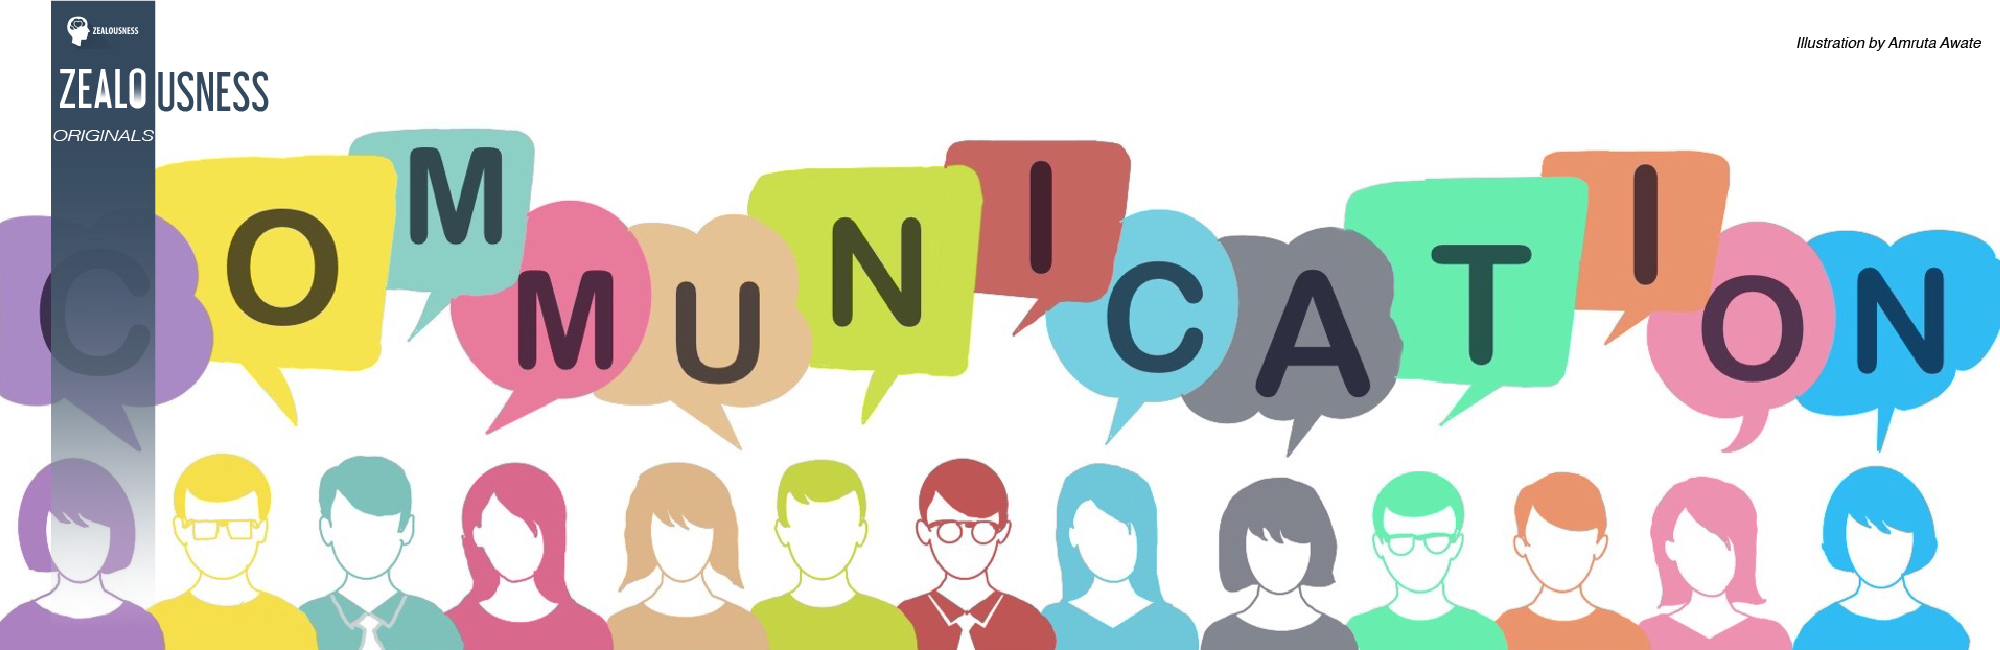 Colorful illustration of person icons with speech bubbles "Communication"